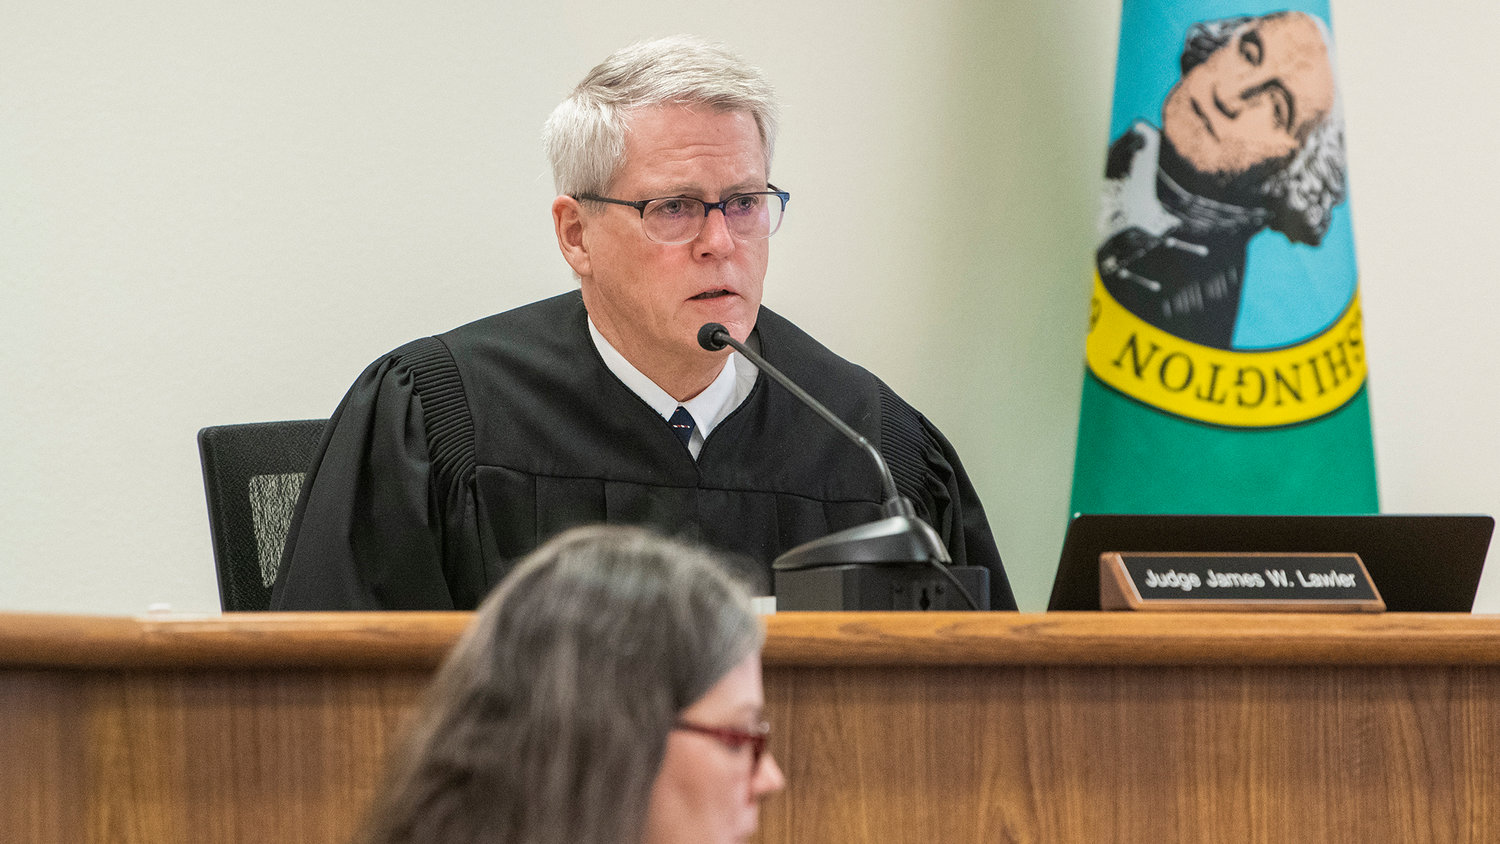 Judge James W. Lawler thanks attendees for their victim impact statements before making a decision regarding sentencing in Lewis County Superior Court Wednesday morning in Chehalis.